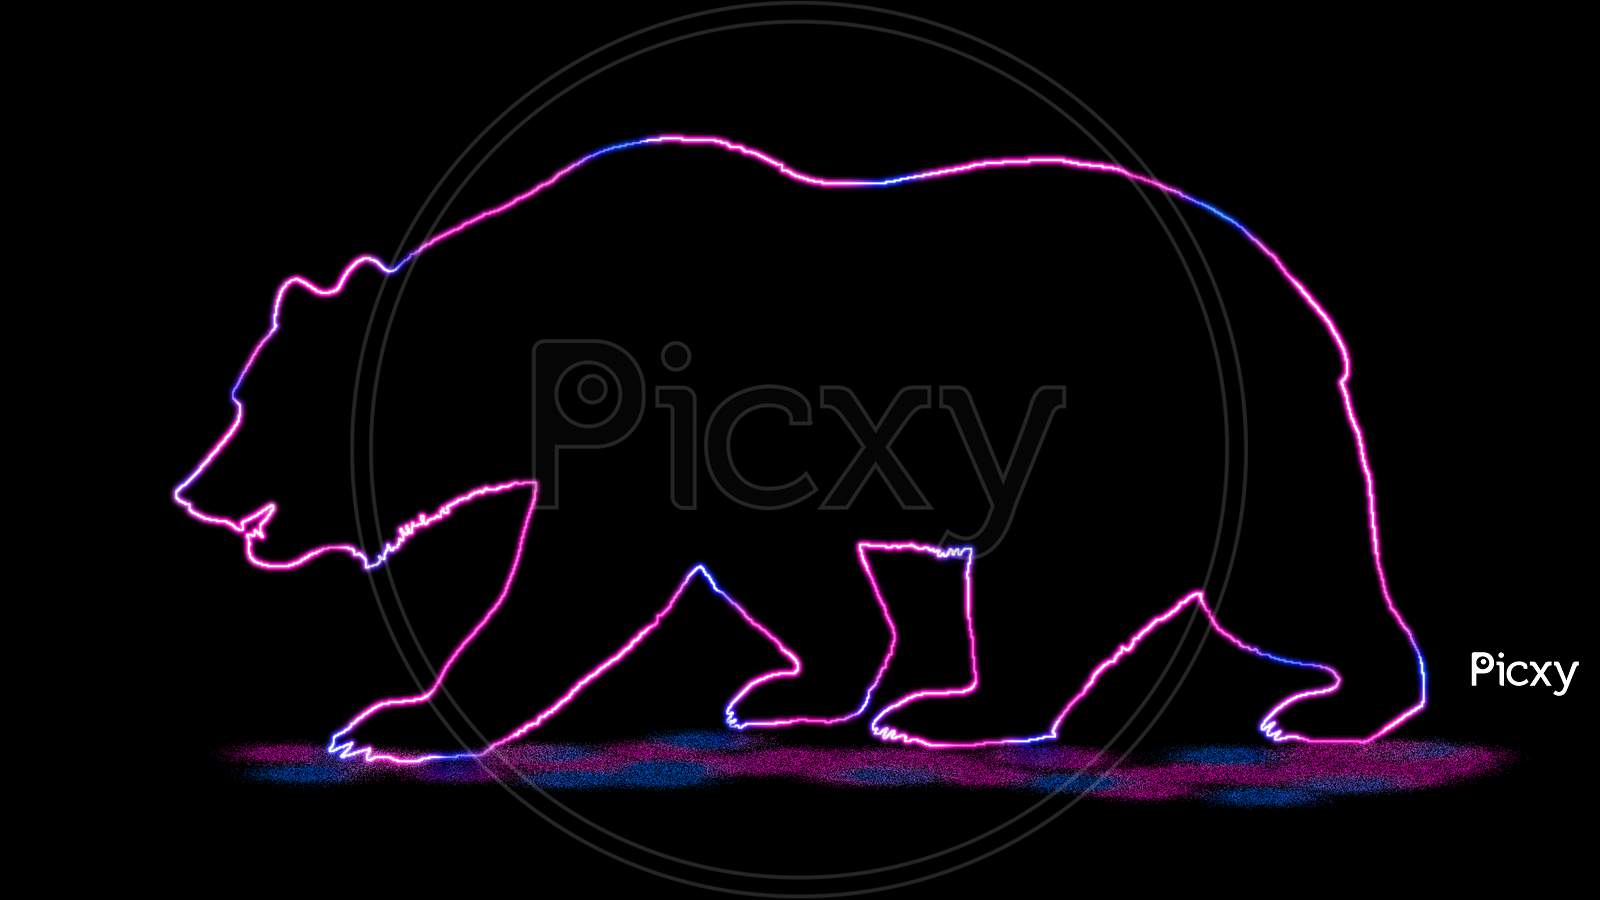 The Beautiful Outline Of Bear, With Neon Light. Animal Outline With Neon Light Effect Isolated On Black Background.